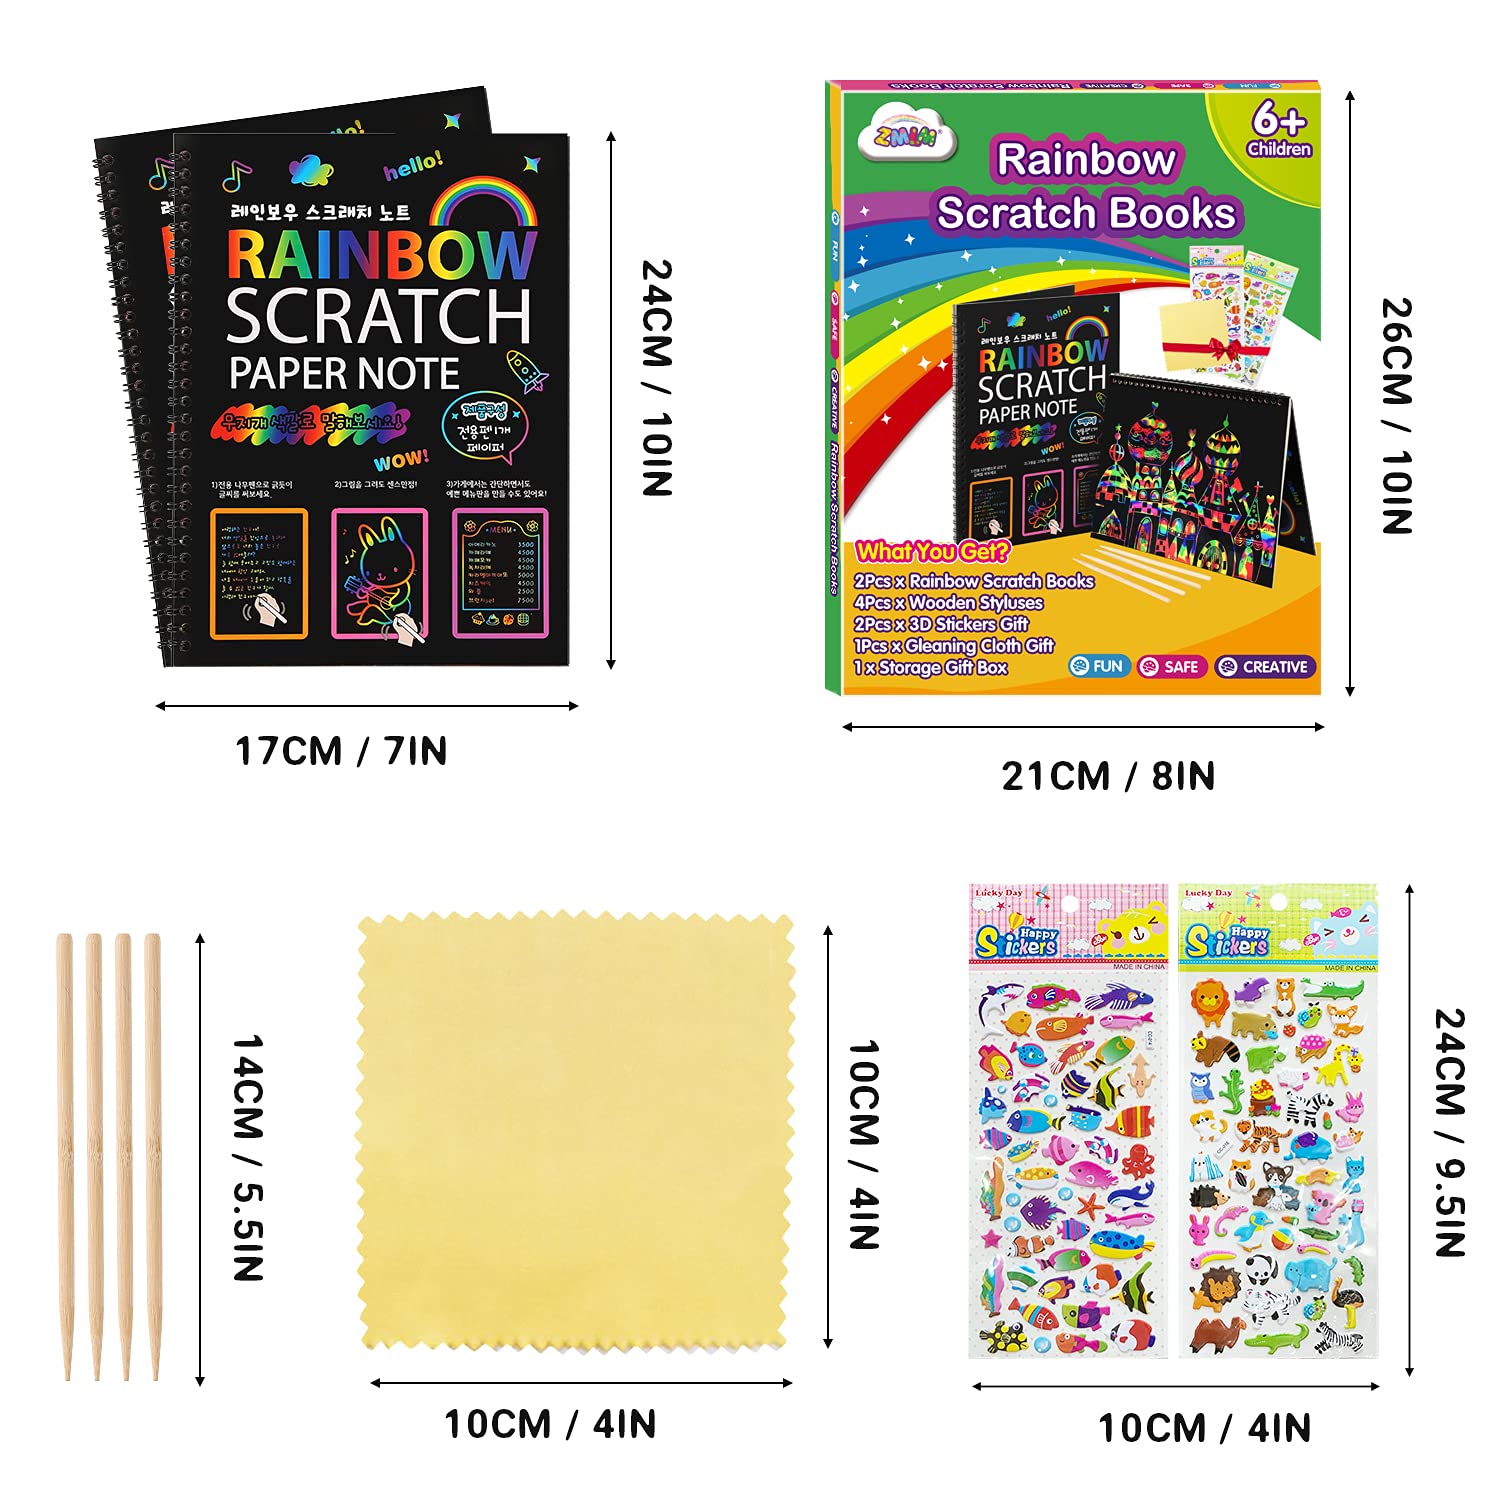 ZMLM Scratch Paper Art Notebooks - Rainbow Scratch Off Art Set for Kids Activity Color Book Pad Black Magic Art Craft Supplies Kits for Girls Boys Birthday Party Favor Game Christmas Toys Gift